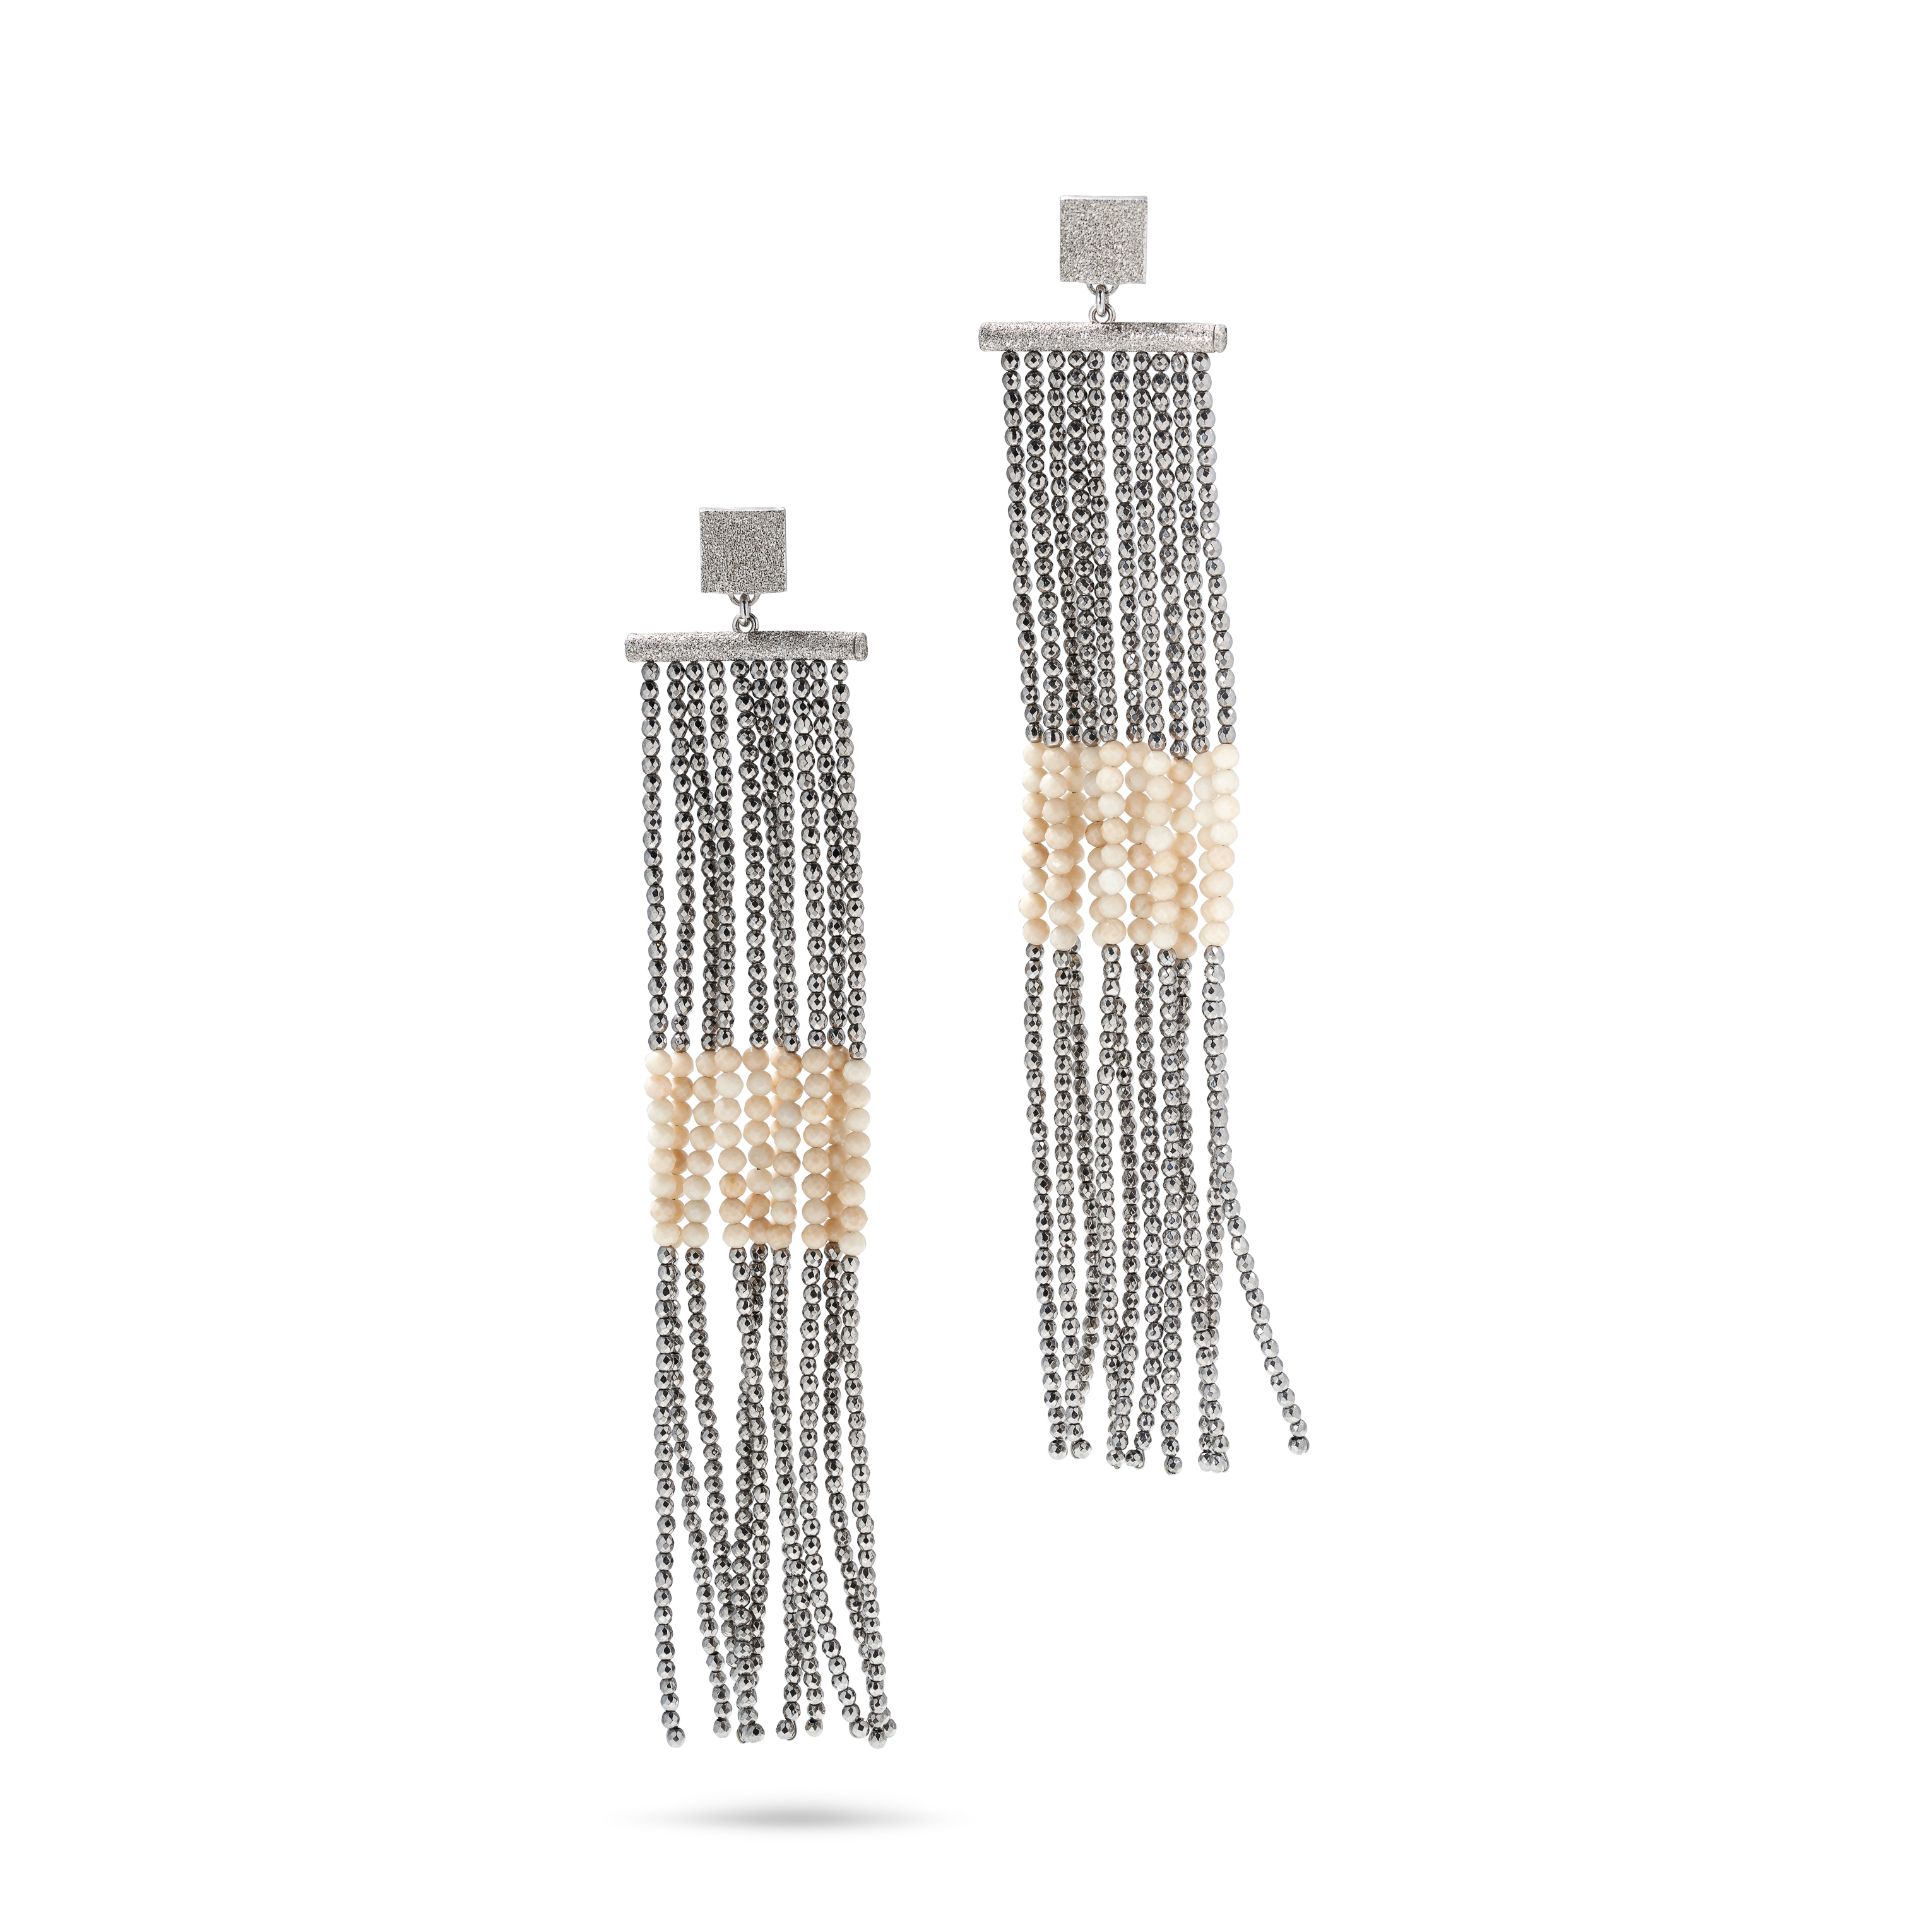 BRUNELLO CUCINELLI, A PAIR OF BEADED EARRINGS, each designed as a tassel comprising dark silver a...